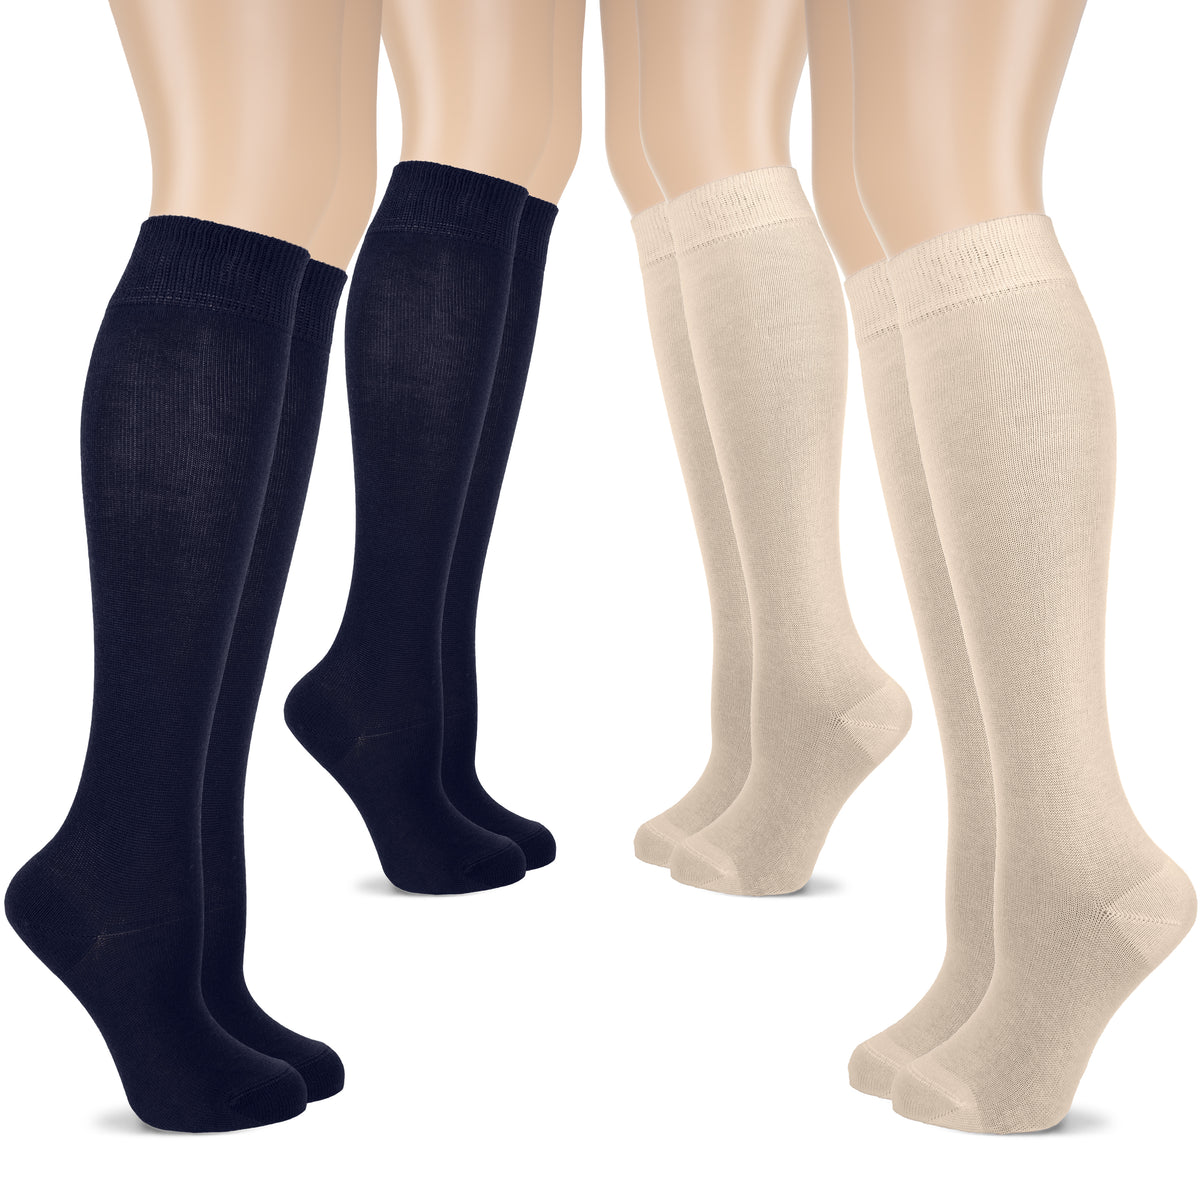 Four pairs of women's knee-high cotton socks in beige and blue colors.